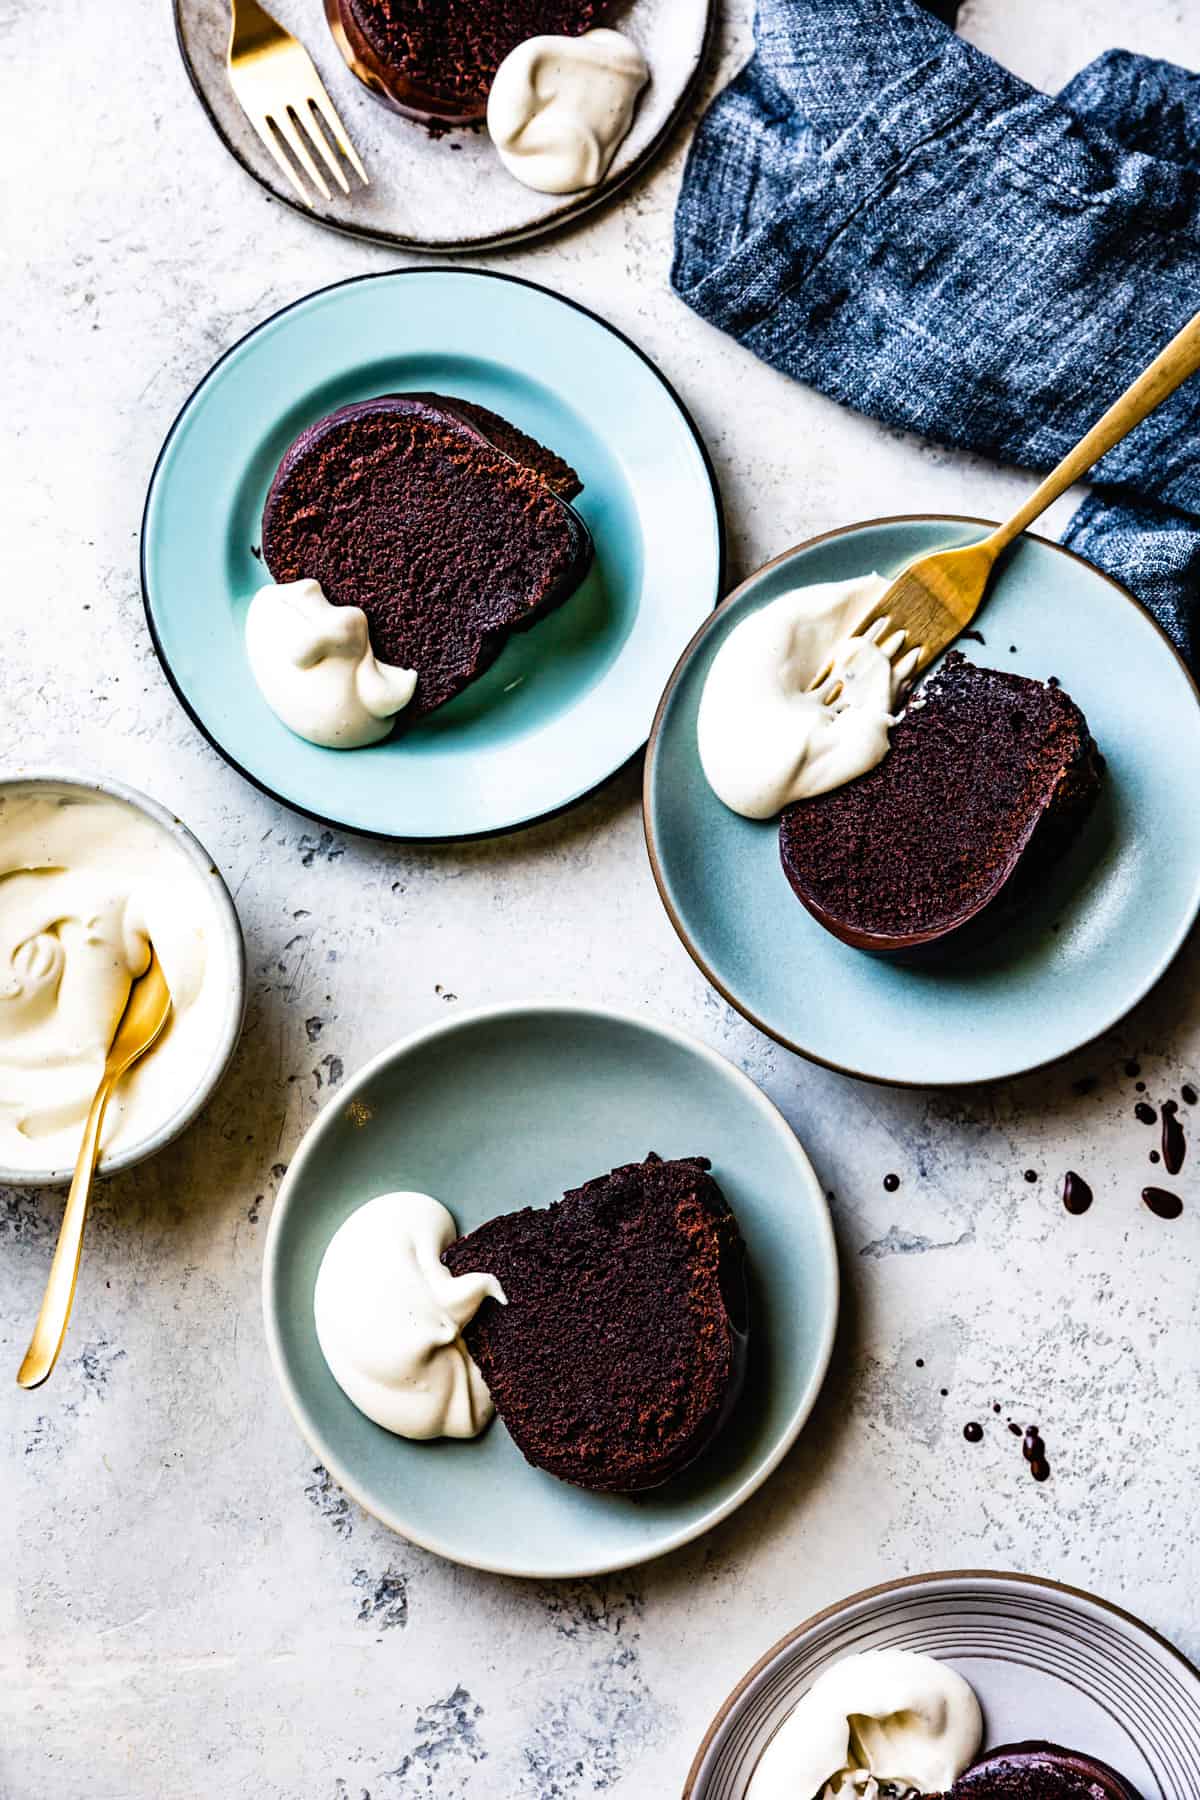 several slices of chocolate bundt cake all smothered in silky creme fraiche whipped cream